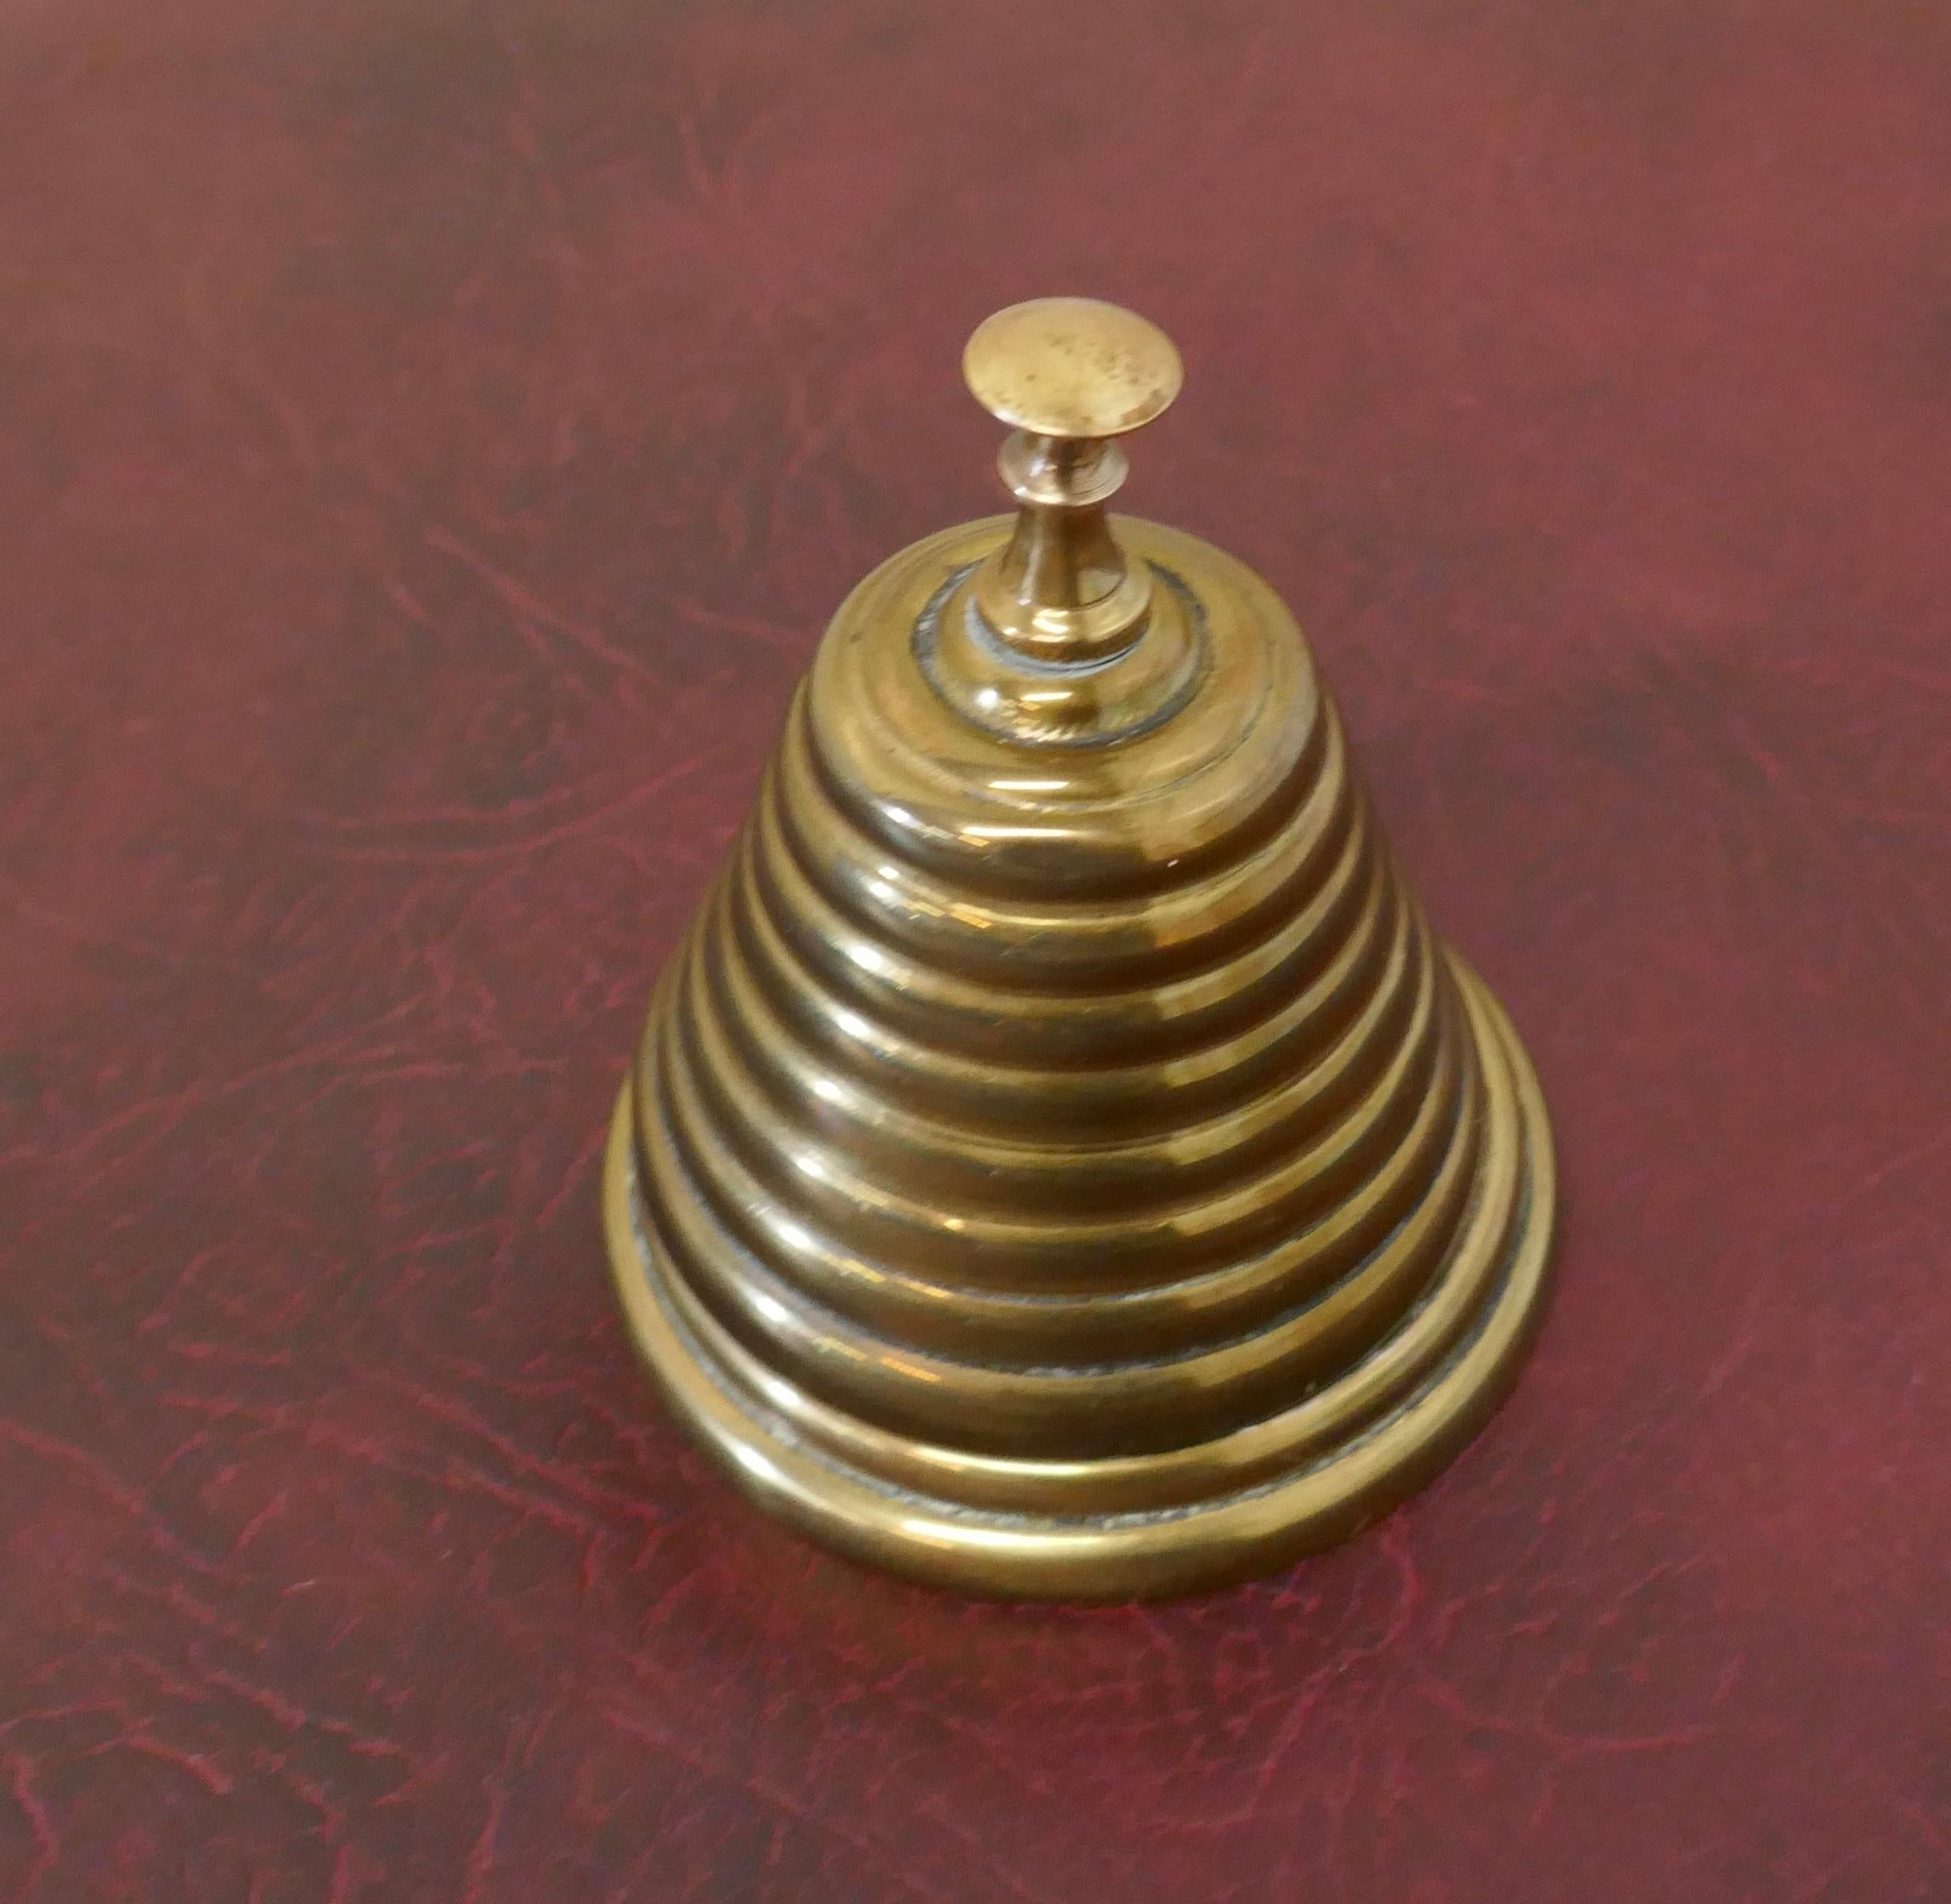 Victorian brass courtesy counter top bell, beehive brass bell

Made in the style of a beehive solid brass, good and ready to use with a high pitched ding, the bell is 3” in diameter and 4” high 
AC37.